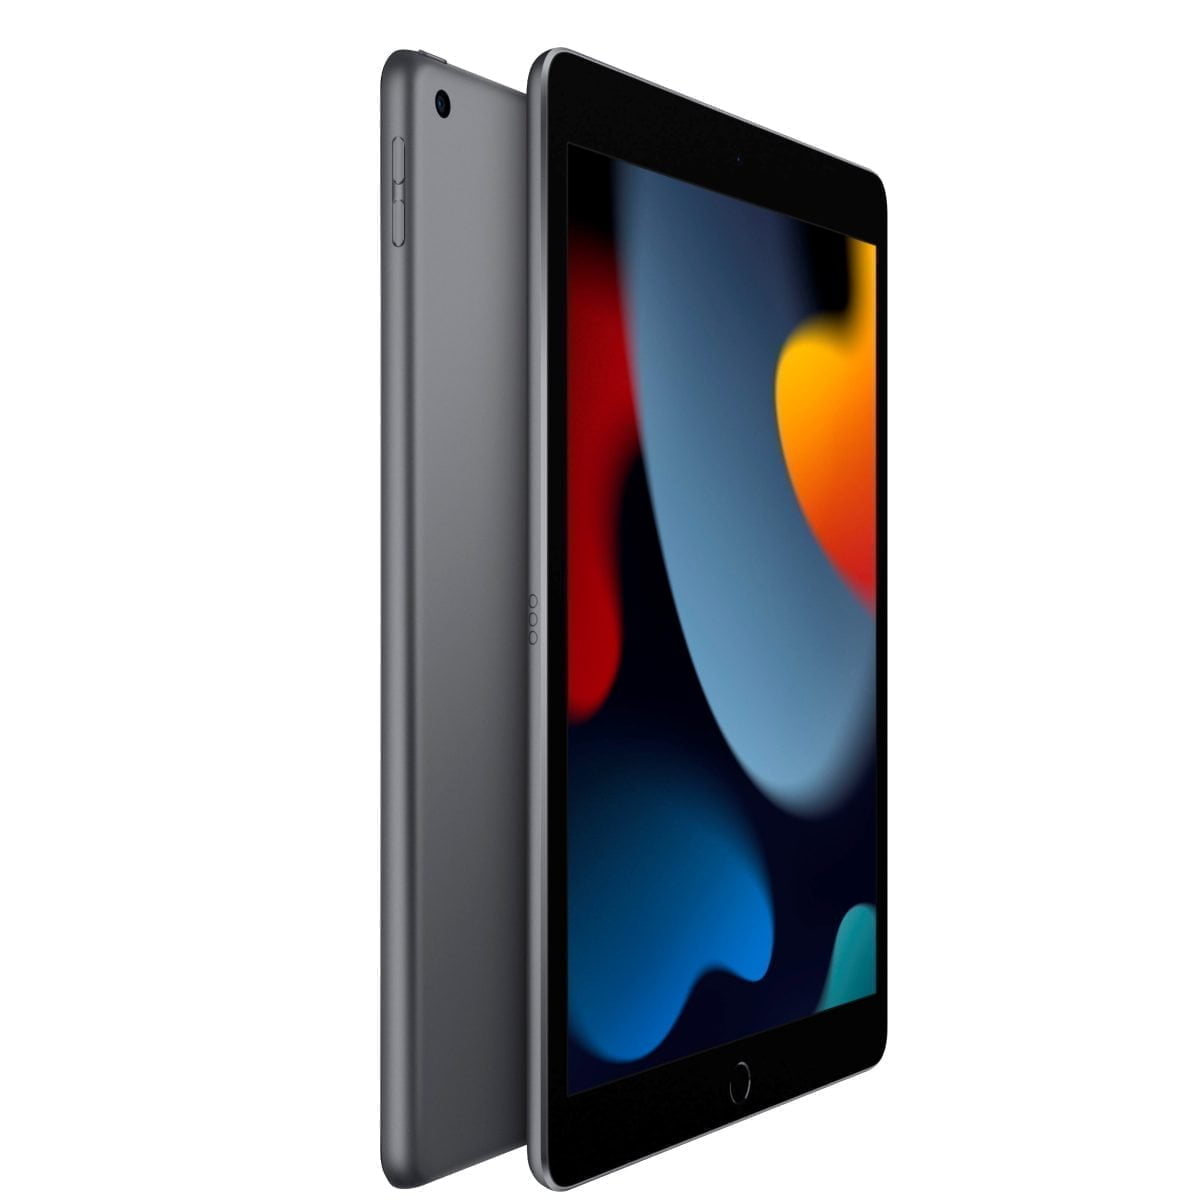 4901809Cv11D Scaled Apple &Lt;H1&Gt;Apple 10.2-Inch Ipad (9Th Generation) With Wi-Fi - 64Gb -&Lt;/H1&Gt; &Lt;H1 Class=&Quot;Heading-5 V-Fw-Regular&Quot;&Gt;Spacegray&Lt;/H1&Gt; Https://Www.youtube.com/Watch?V=Loaocx5Xc9S Powerful. Easy To Use. Versatile. The New Ipad Has A Beautiful 10.2-Inch Retina Display, Powerful A13 Bionic Chip, An Ultra Wide Front Camera With Center Stage, And Works With Apple Pencil And The Smart Keyboard.¹ Ipad Lets You Do More, More Easily. All For An Incredible Value. Ipad Apple 10.2-Inch Ipad (9Th Generation) With Wi-Fi - 64Gb - Space Gray